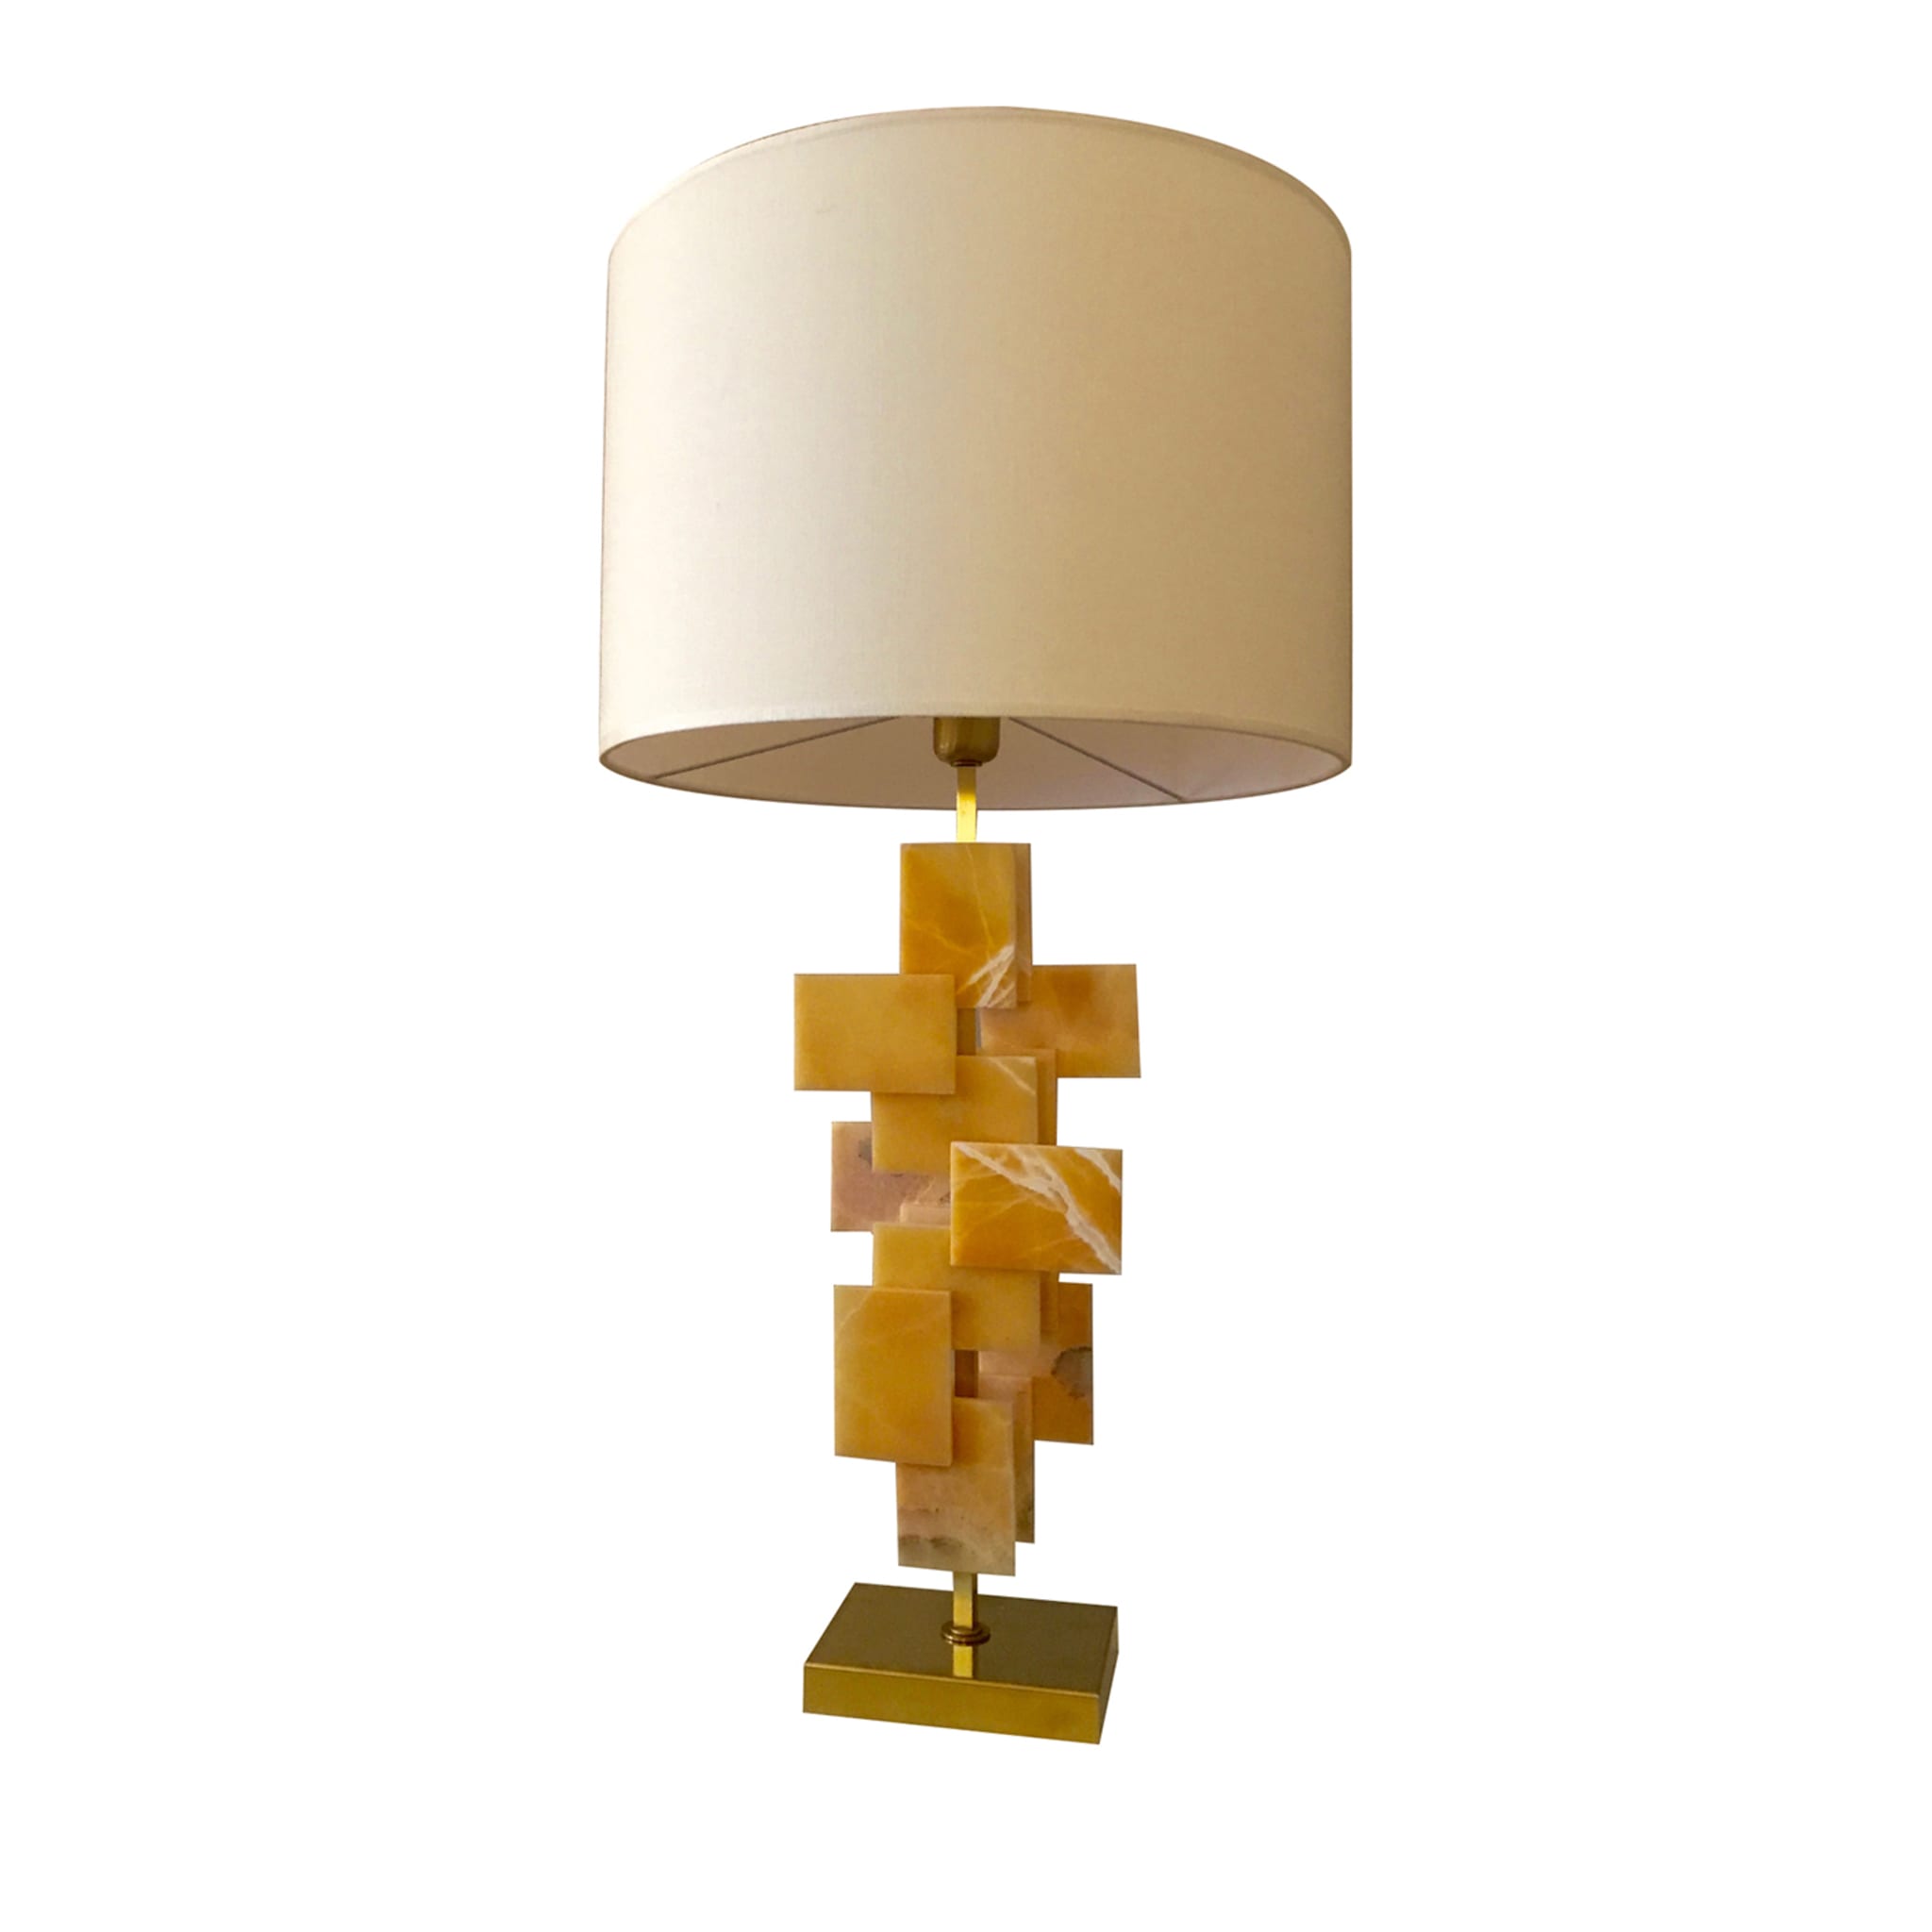 " Tiles" Table Lamp in Yellow Onyx and Satin Brass - Main view